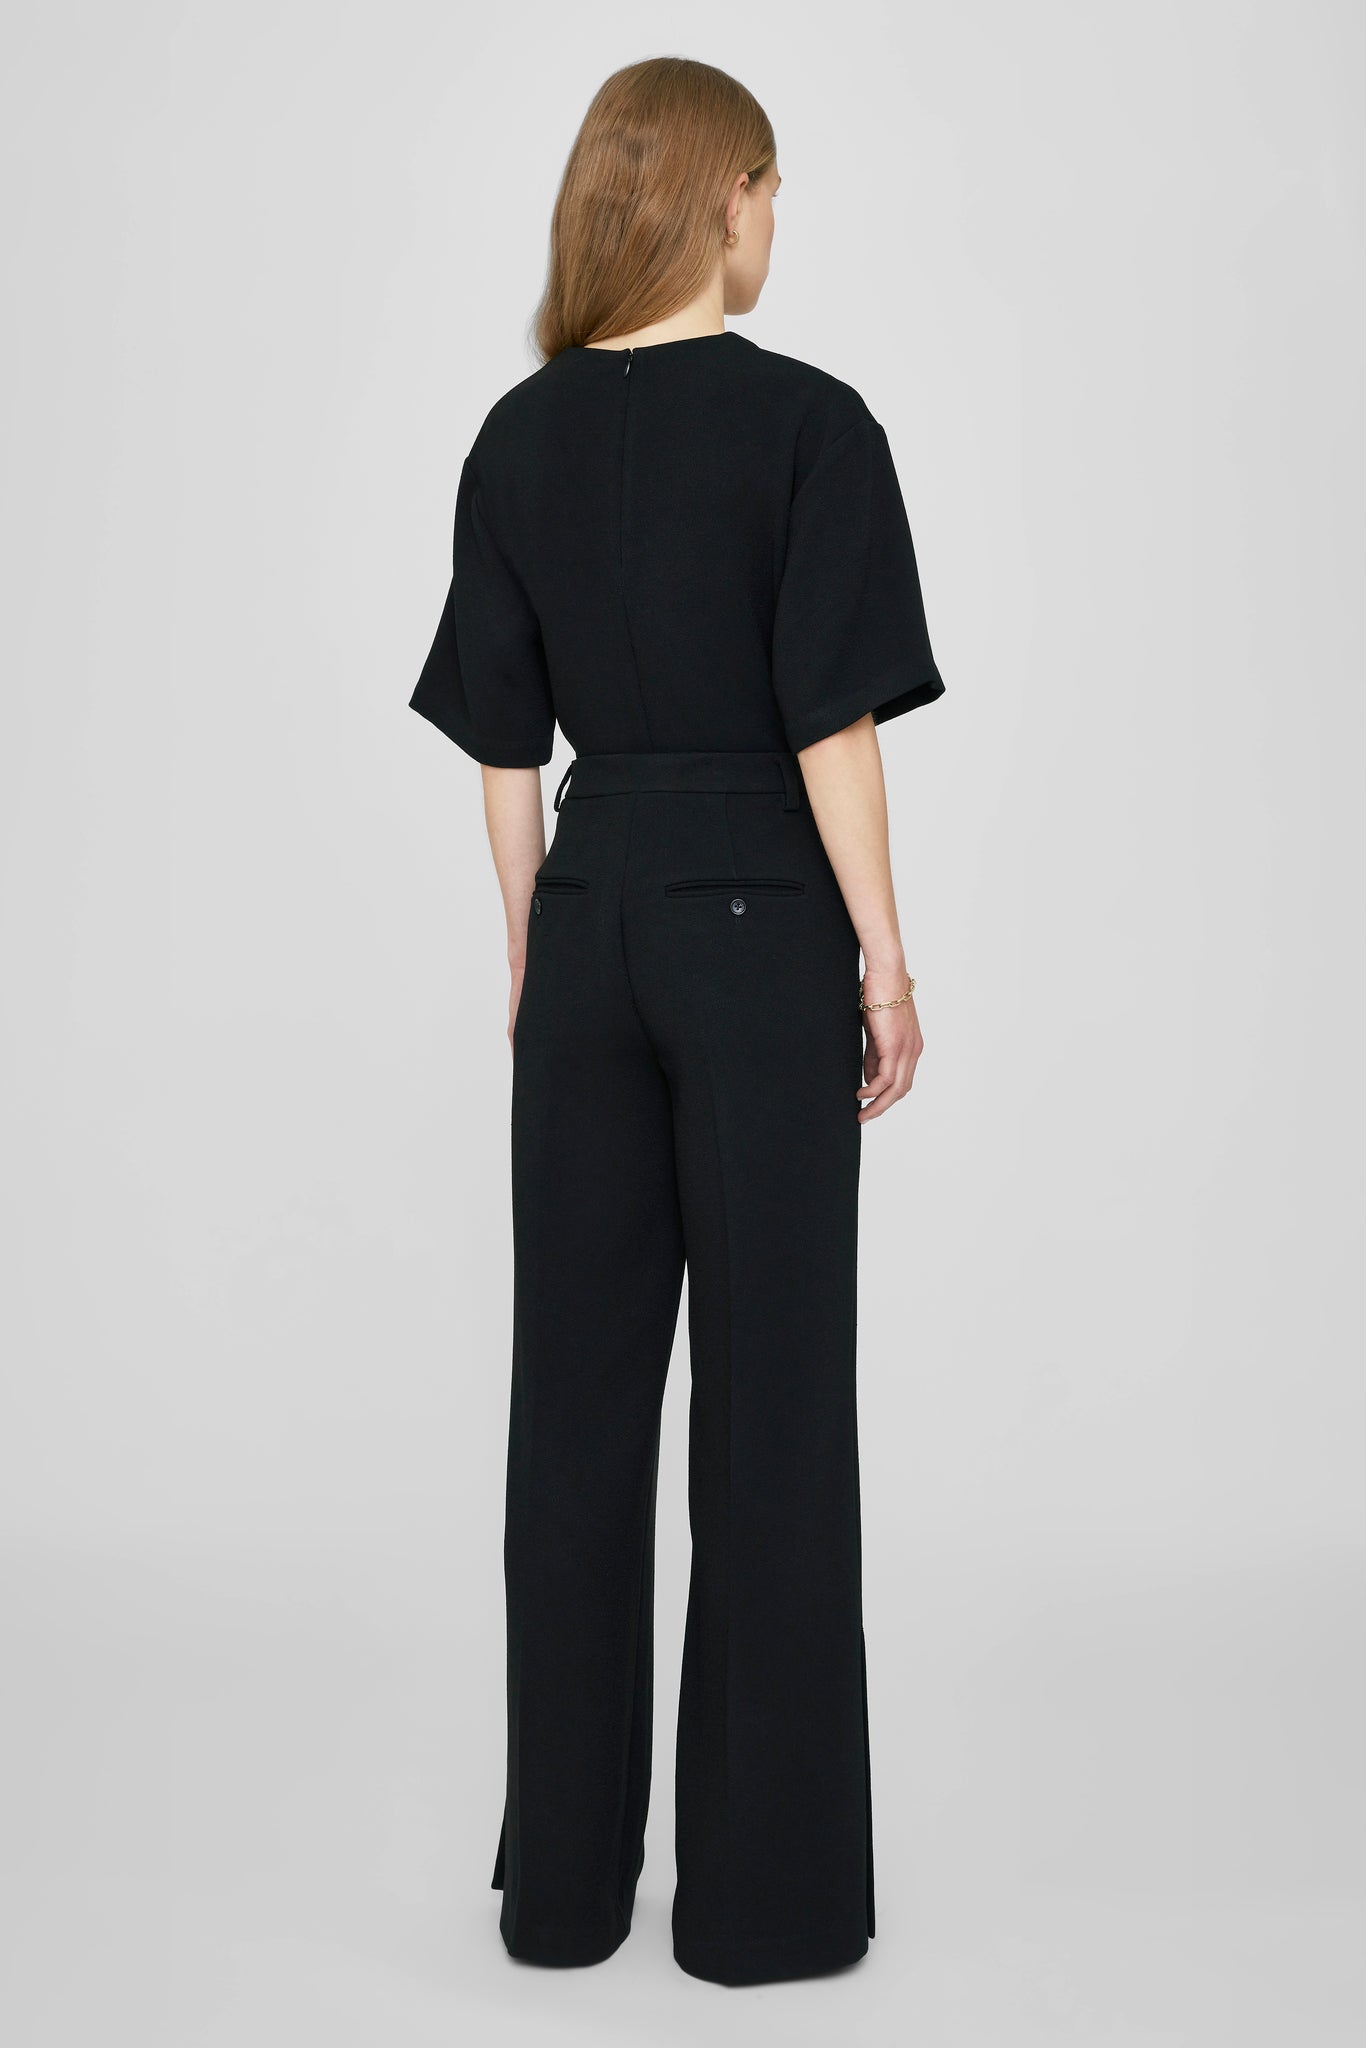 Anine Bing Lyra Trouser in Black available at TNT The New Trend Australia.